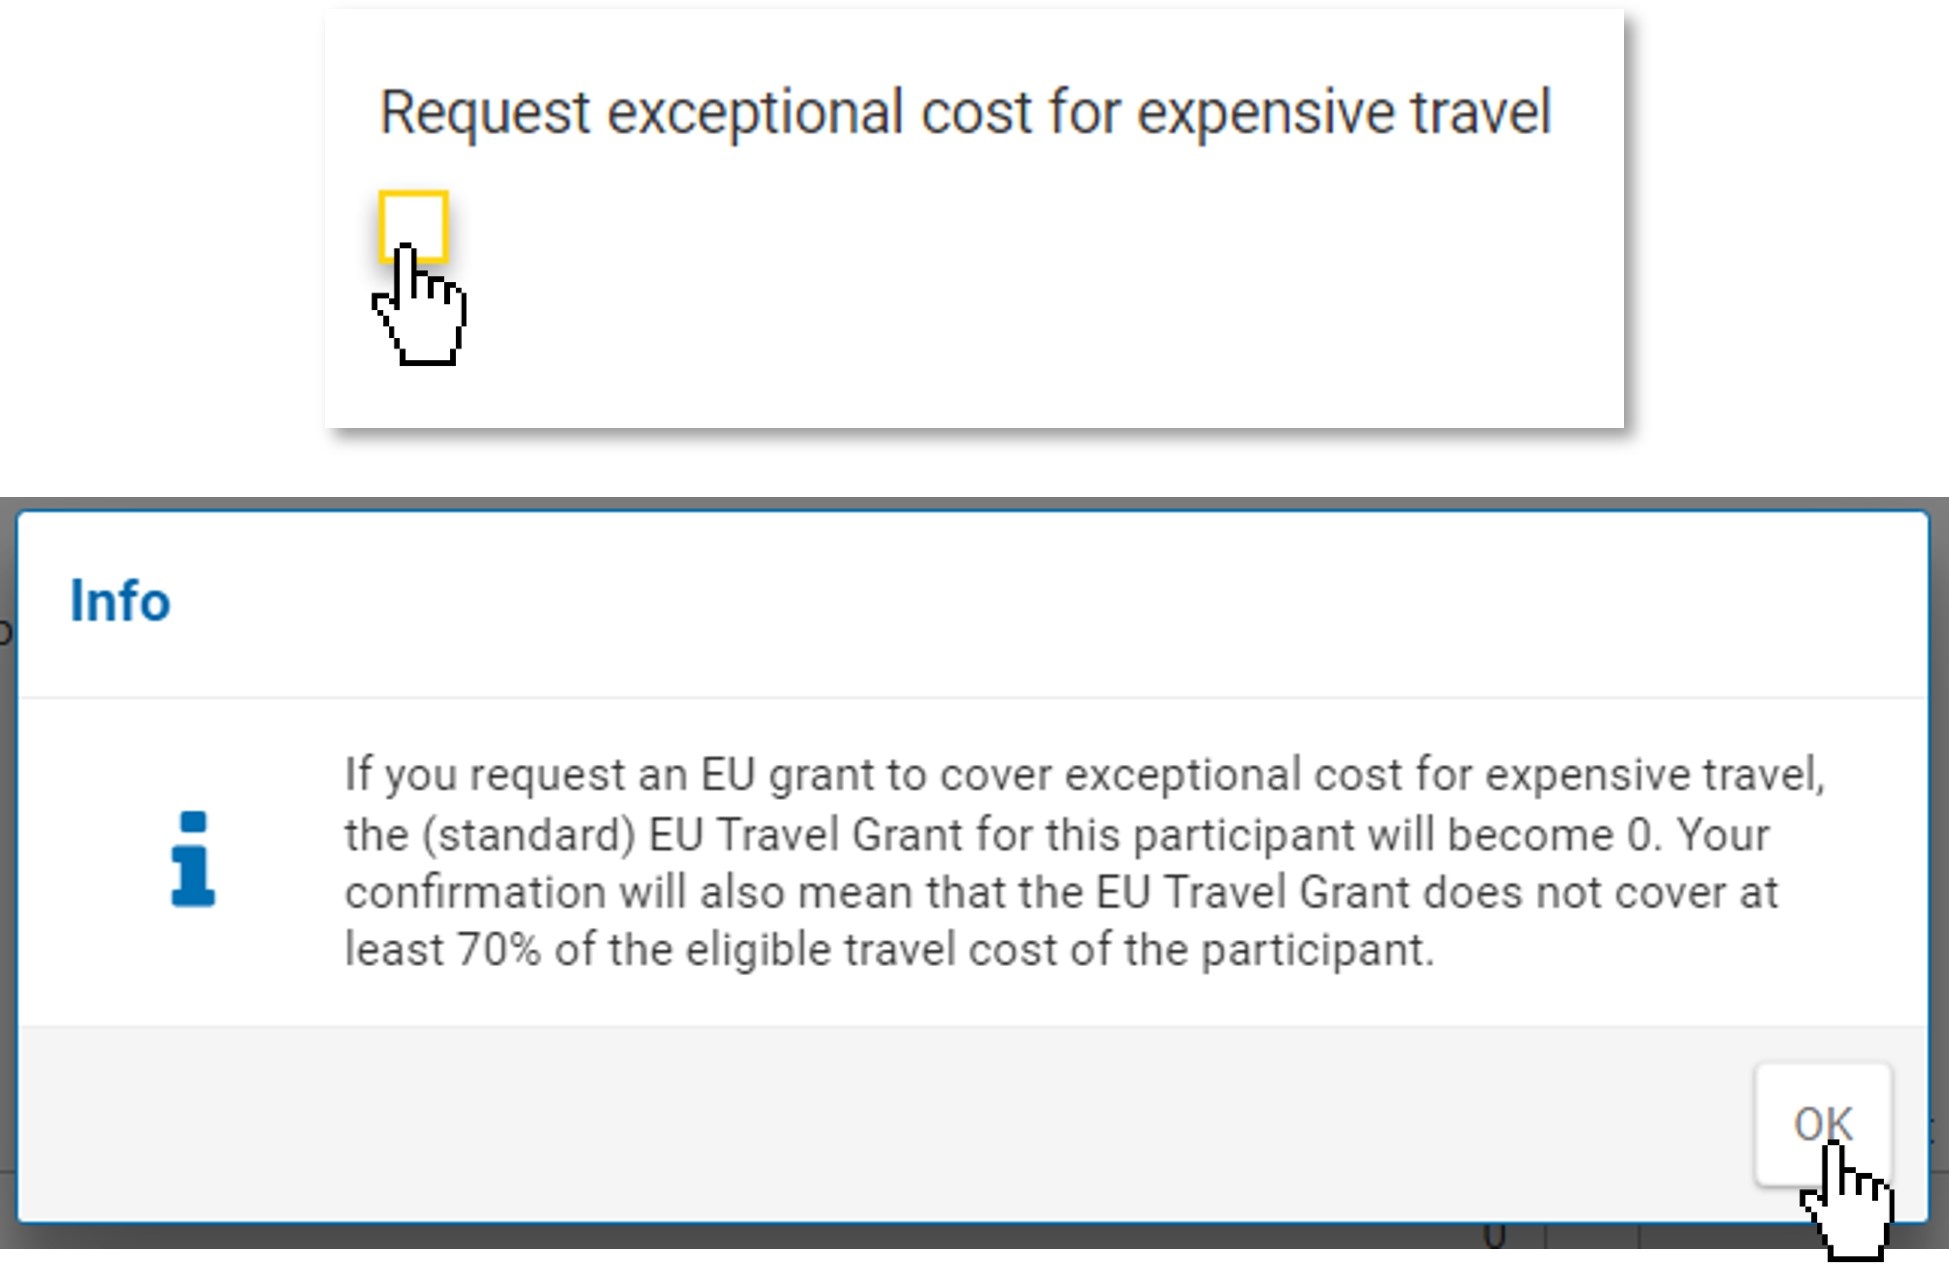 Popup message in case of exceptional costs requested